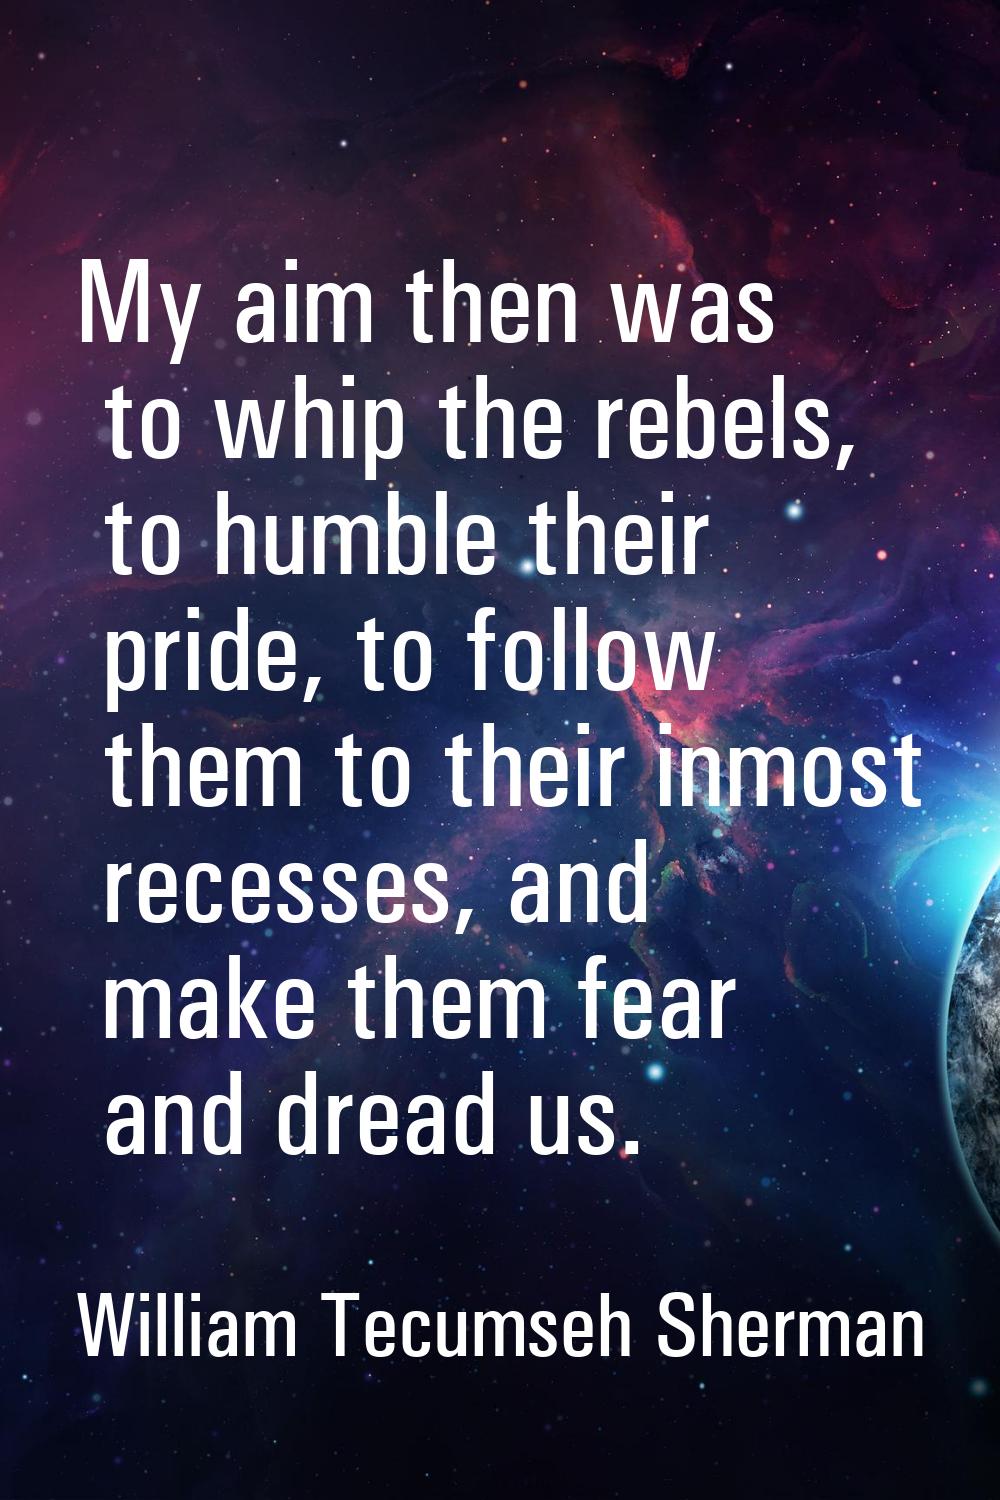 My aim then was to whip the rebels, to humble their pride, to follow them to their inmost recesses,